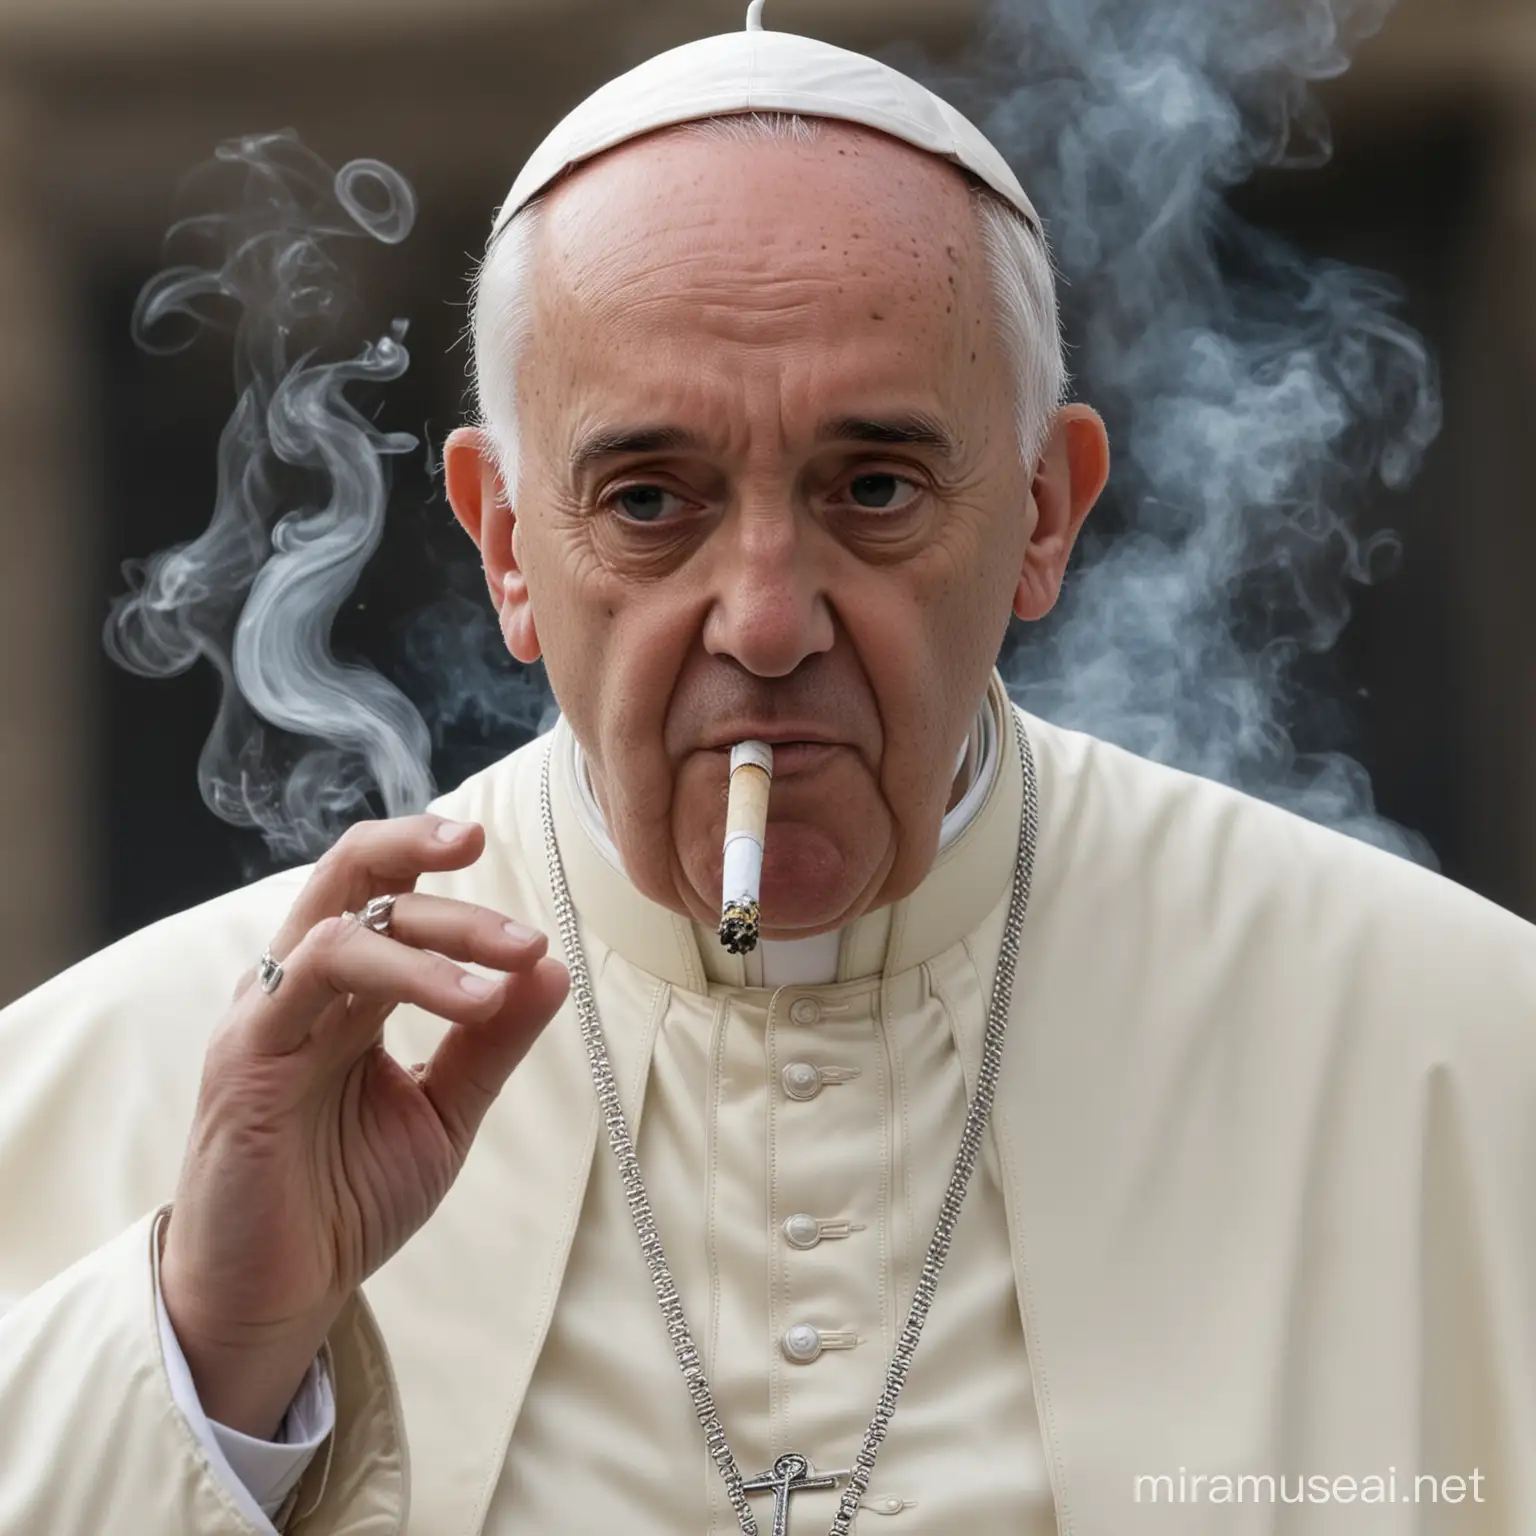 Pope Francis Smoking Drugs Controversial Illustration of Religious Figure Engaging in Taboo Activity